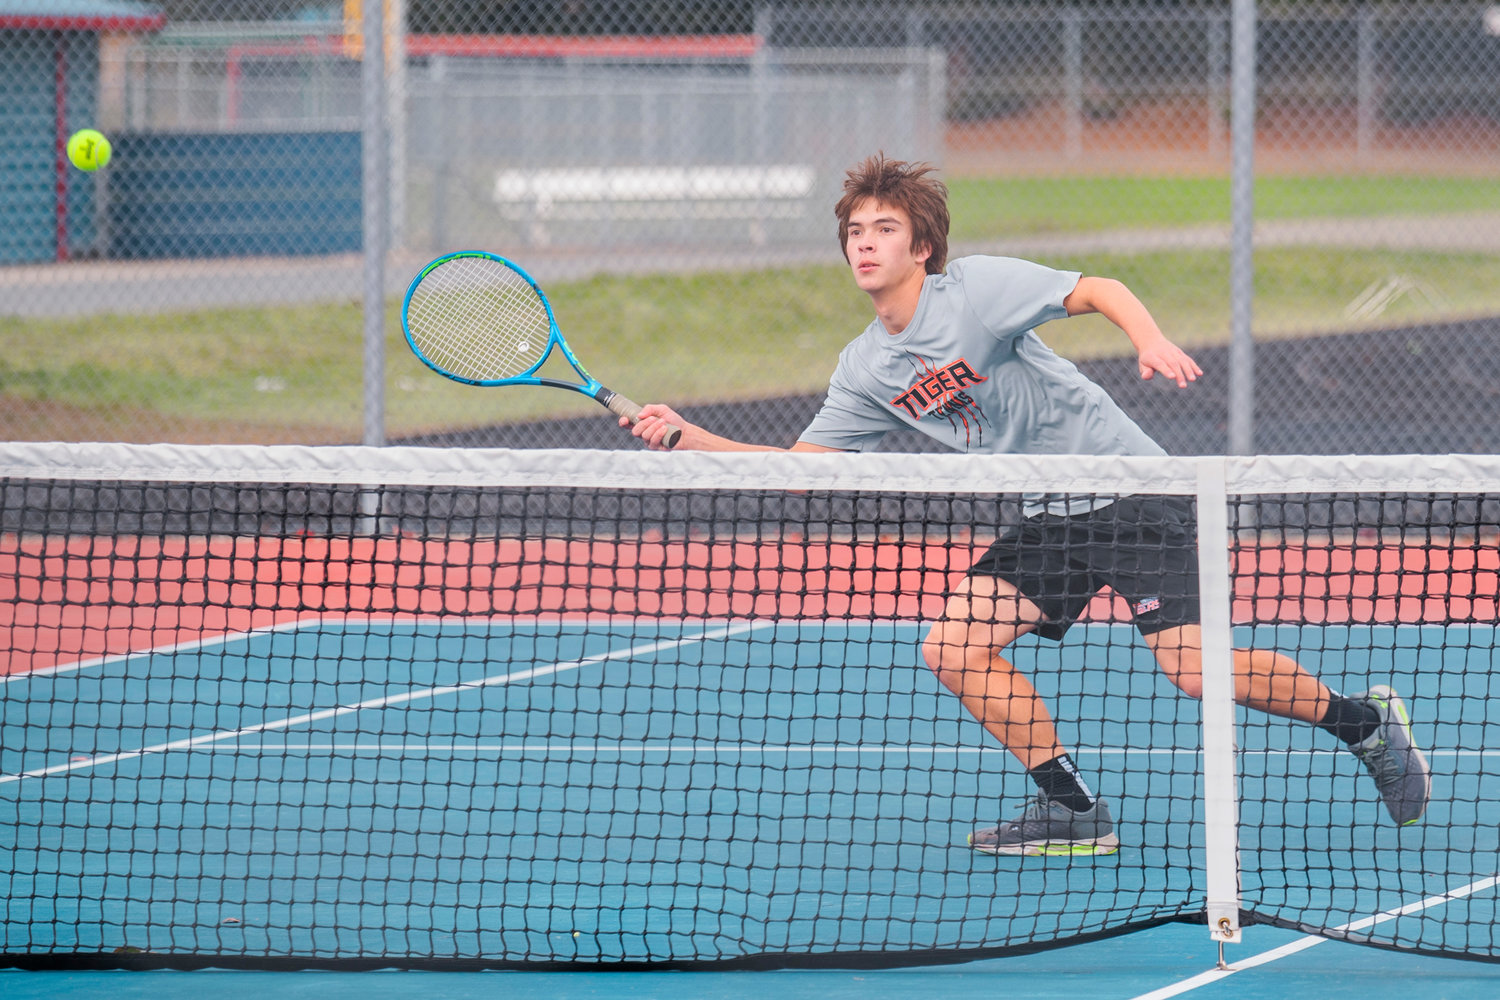 Centralia’s Brandon Yeung tracks a ball over the net during a doubles match at Black Hills High School Tuesday afternoon.